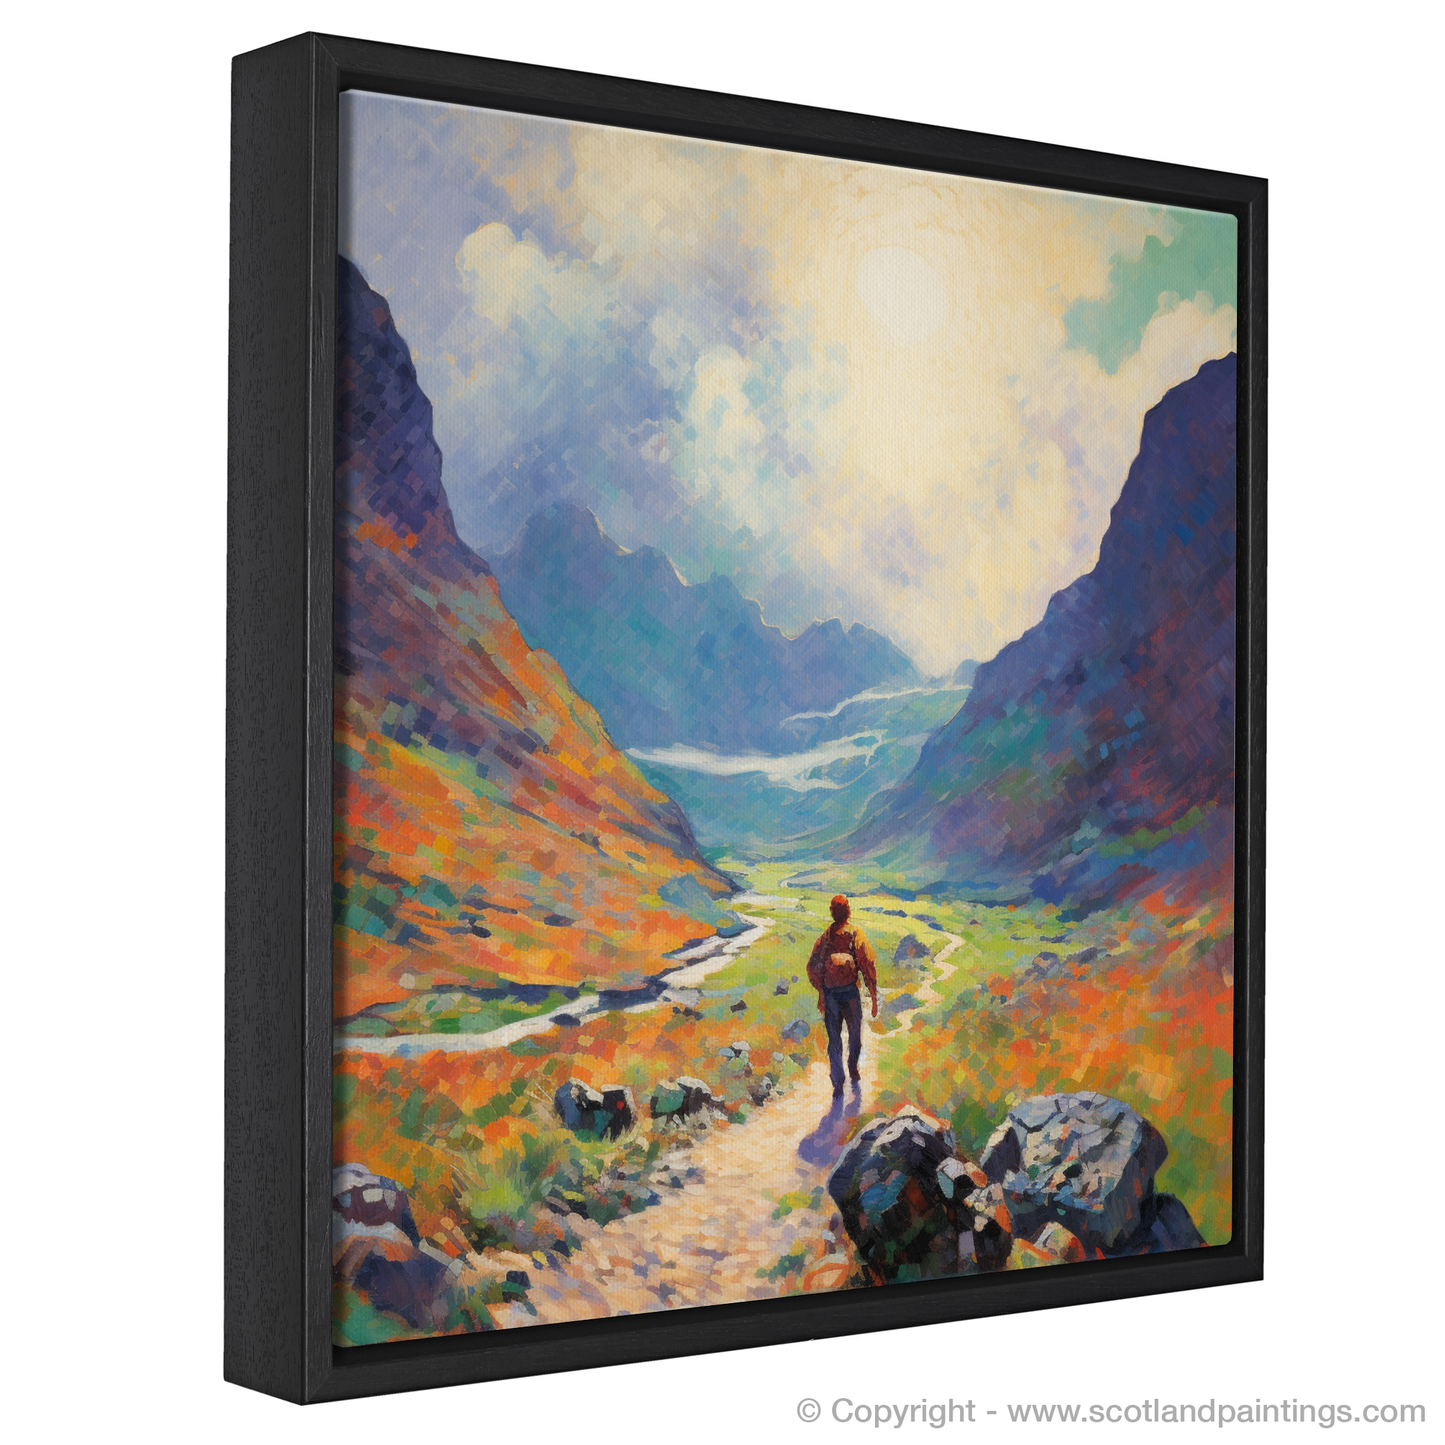 Painting and Art Print of Lone hiker in Glencoe during summer entitled "Summer Solitude in Glencoe Highlands".